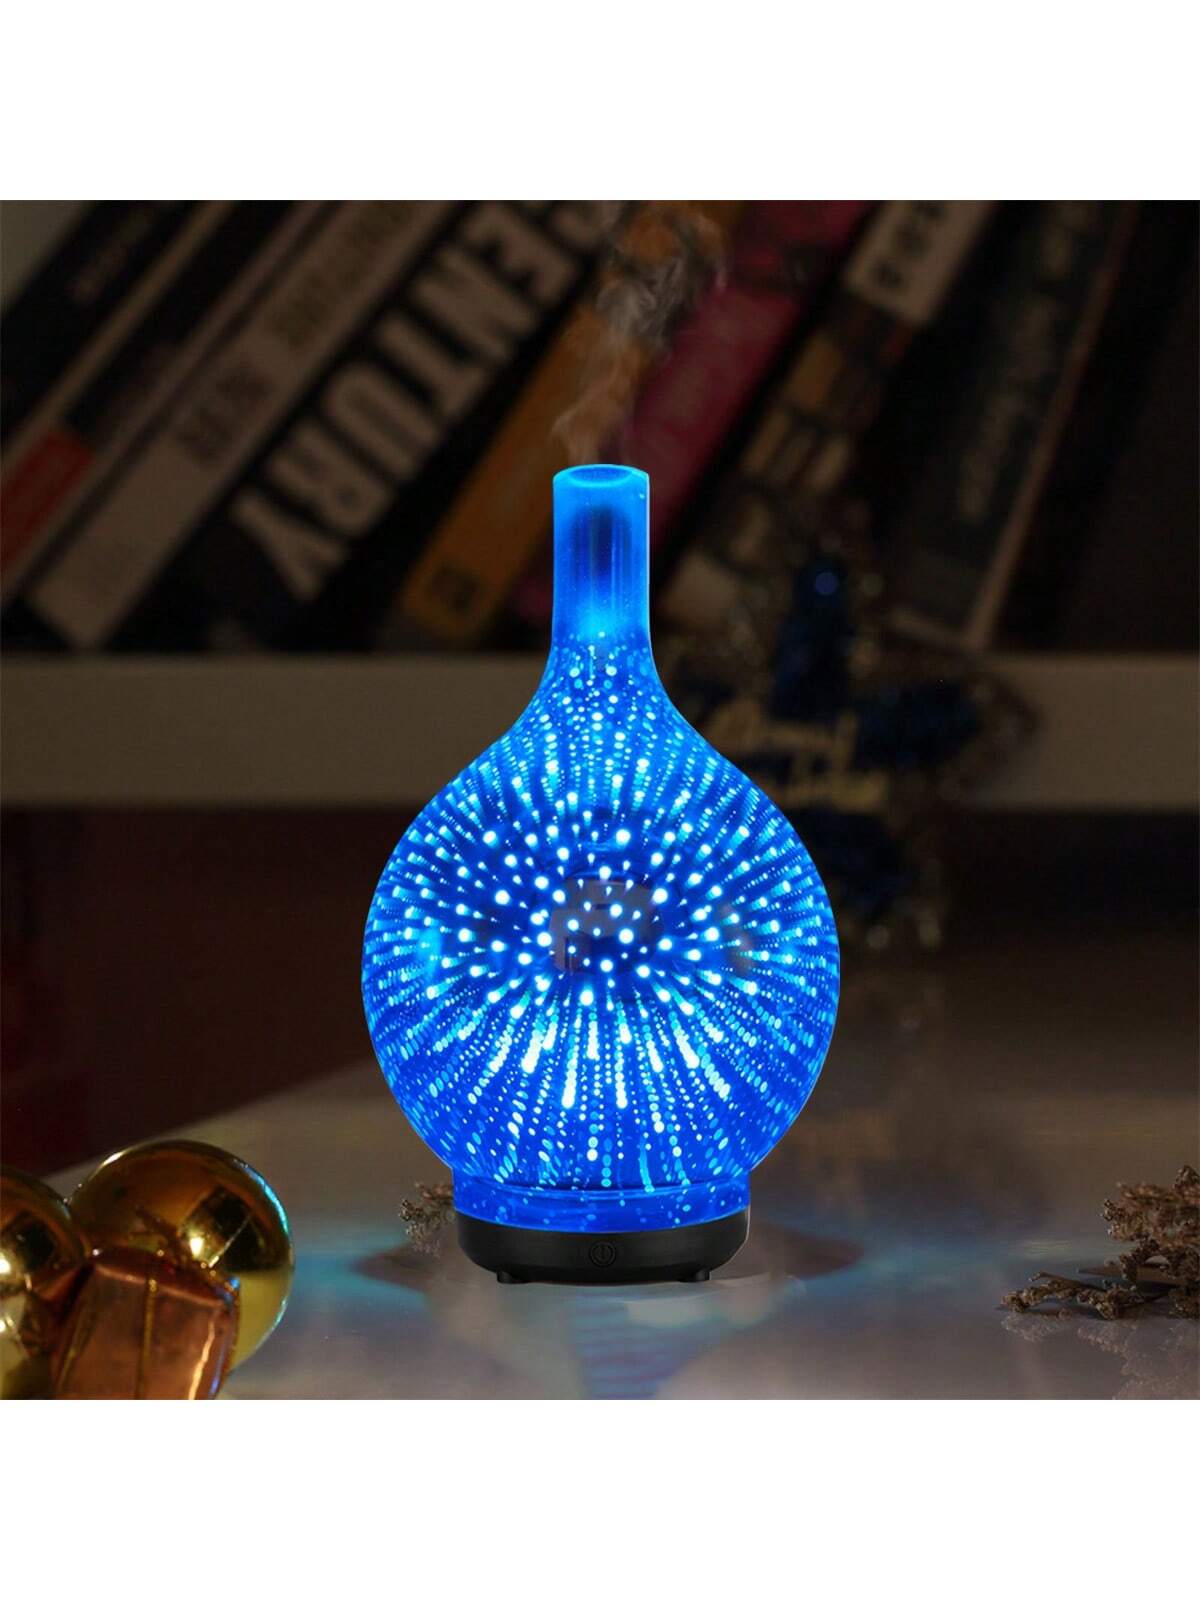 500ml Premium, Essential Oil Diffuser with Remote Control, 5 in 1 Ultrasonic Aromatherapy Fragrant Oil Humidifier Vaporizer, Timer and Auto-Off Safety Switch,Random black and white base.-glass color-7